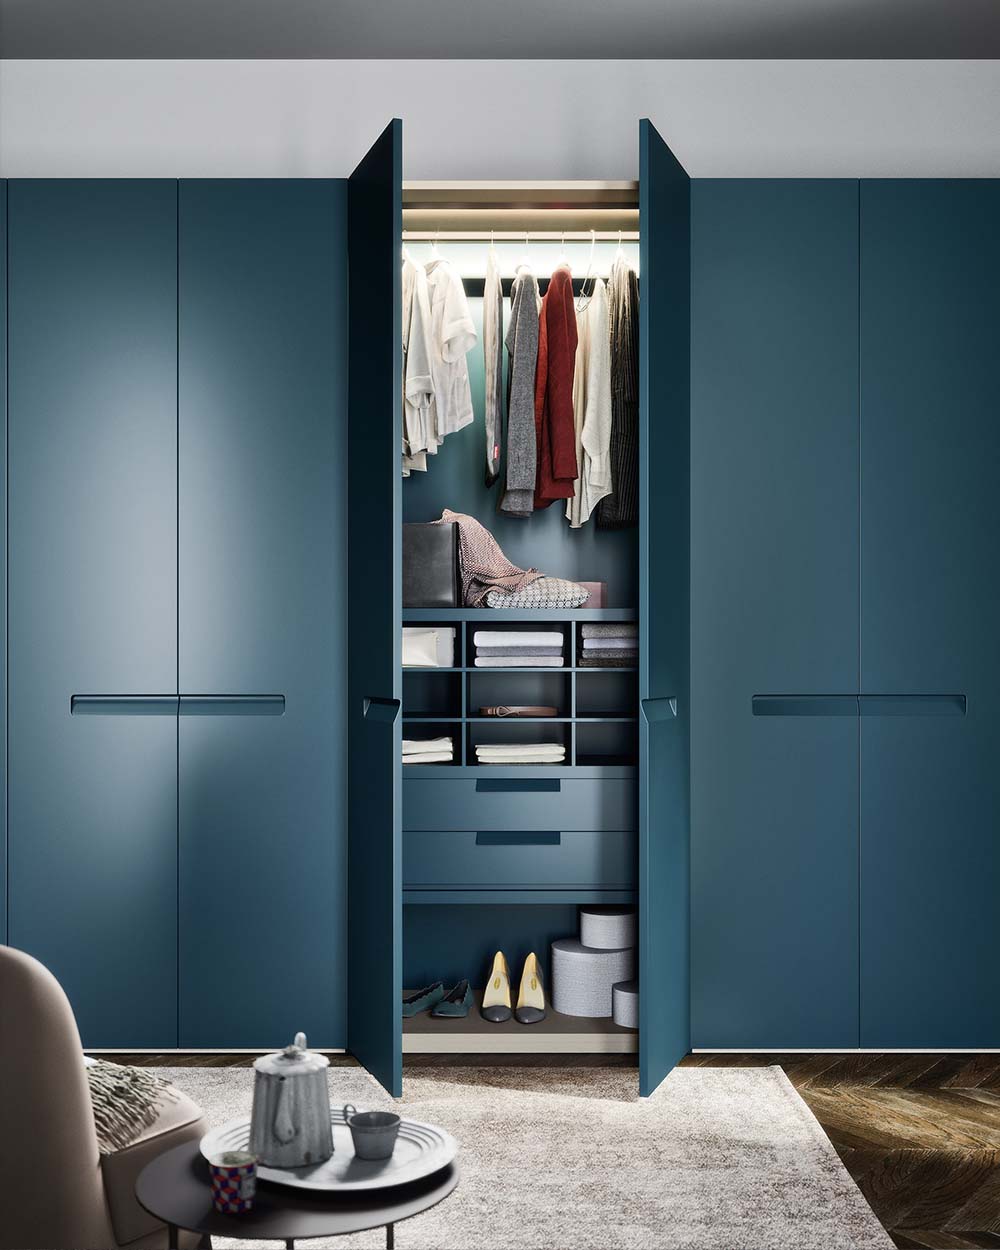 Modern fitted wardrobe fitted to your home by our interior designers at Krieder UK.